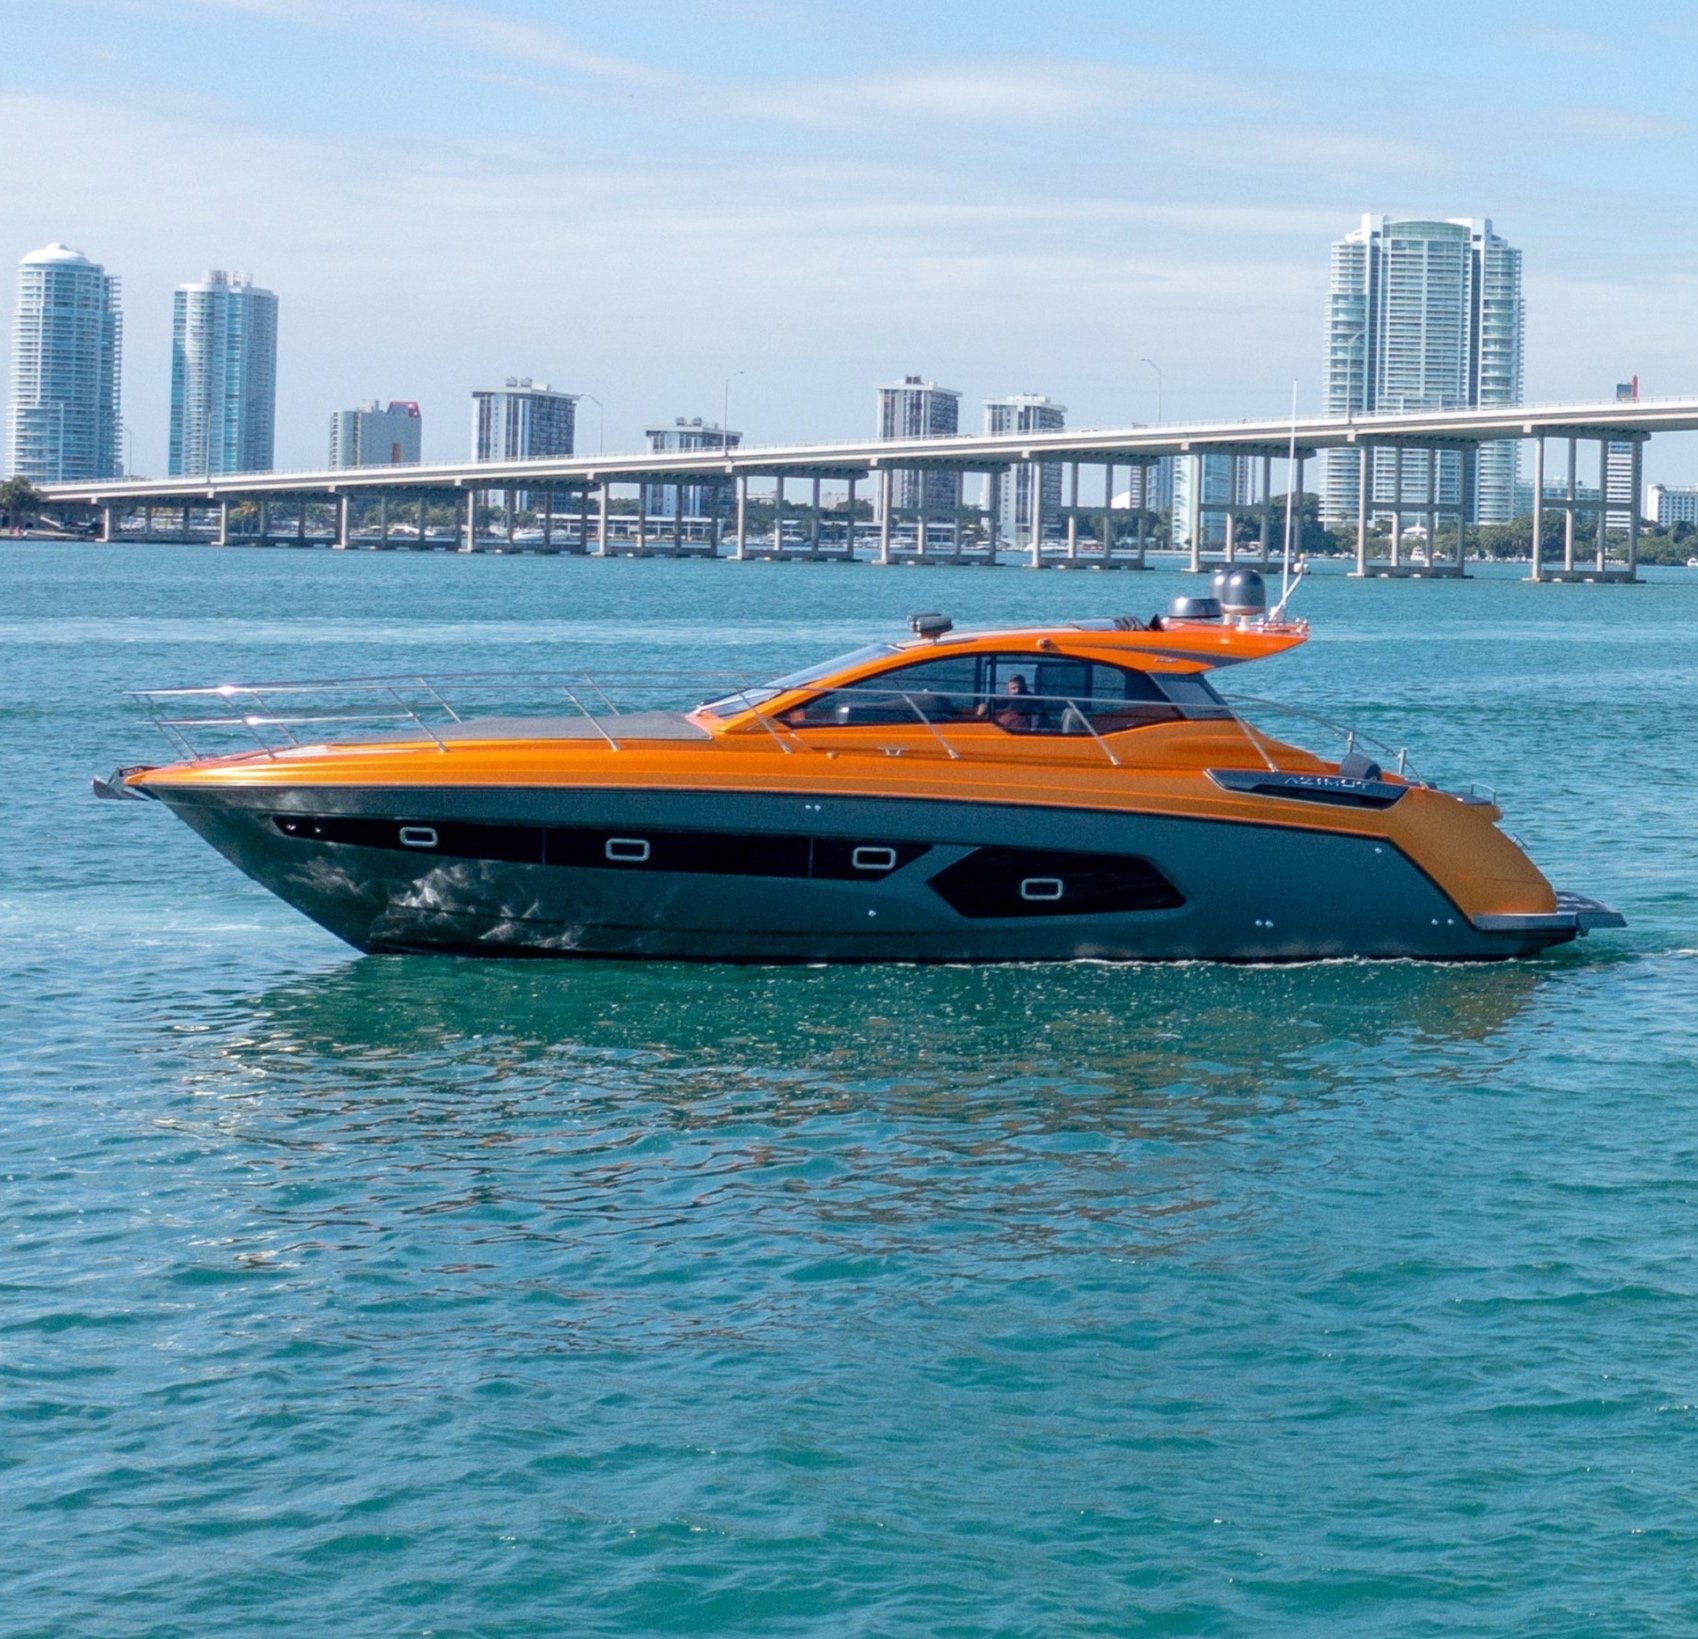 48 ft Azimut Bravo | From $1550 | 13 guest max